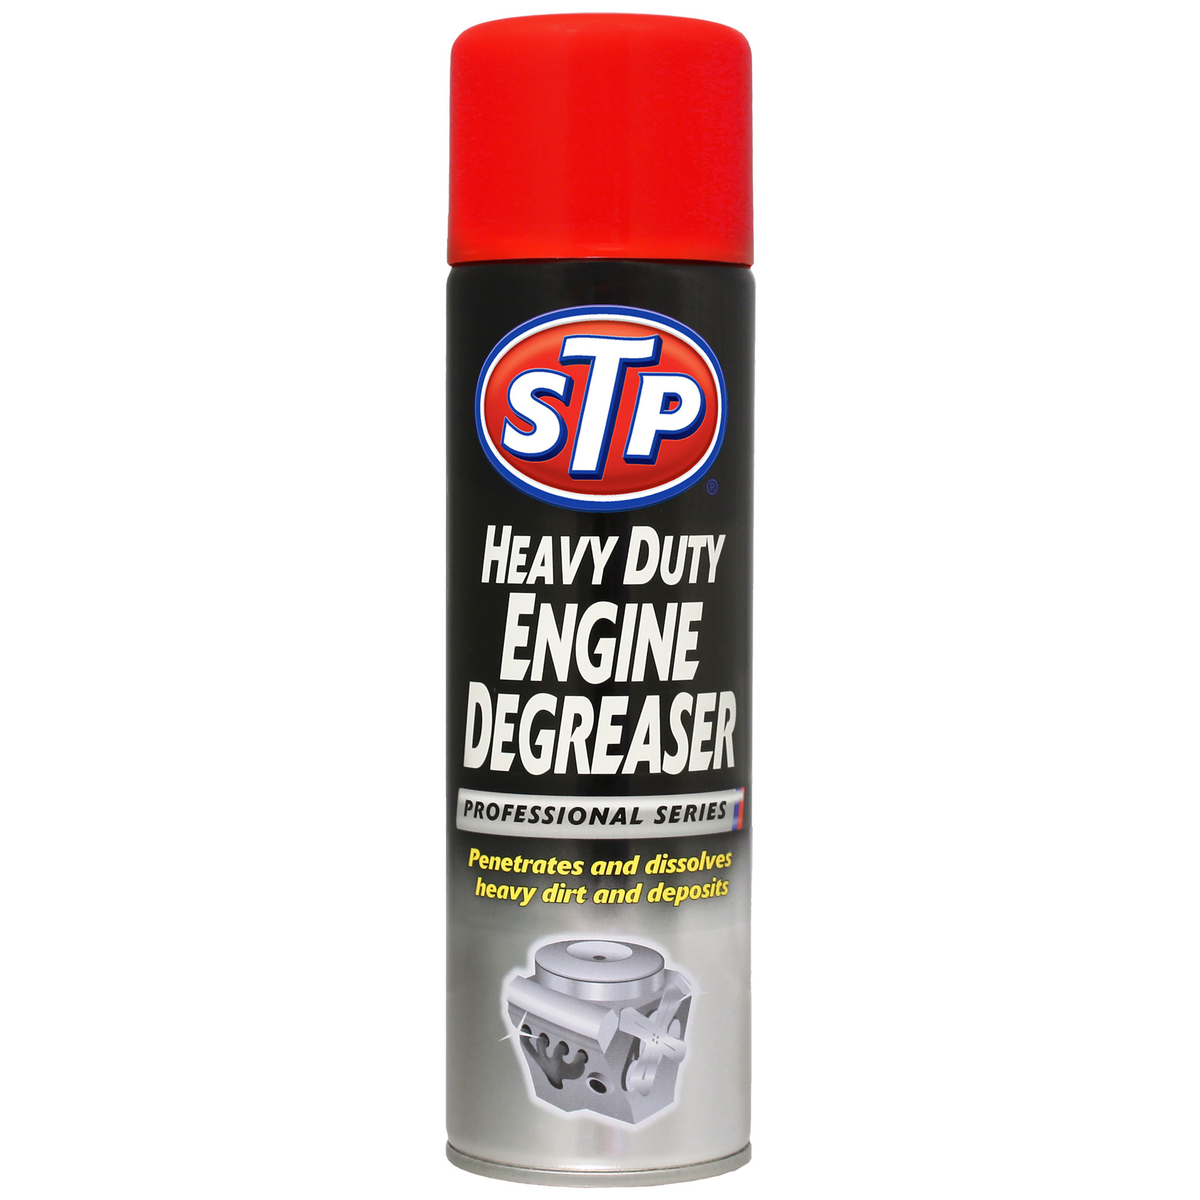 STP Heavy Duty Engine Degreasers, 500 ml